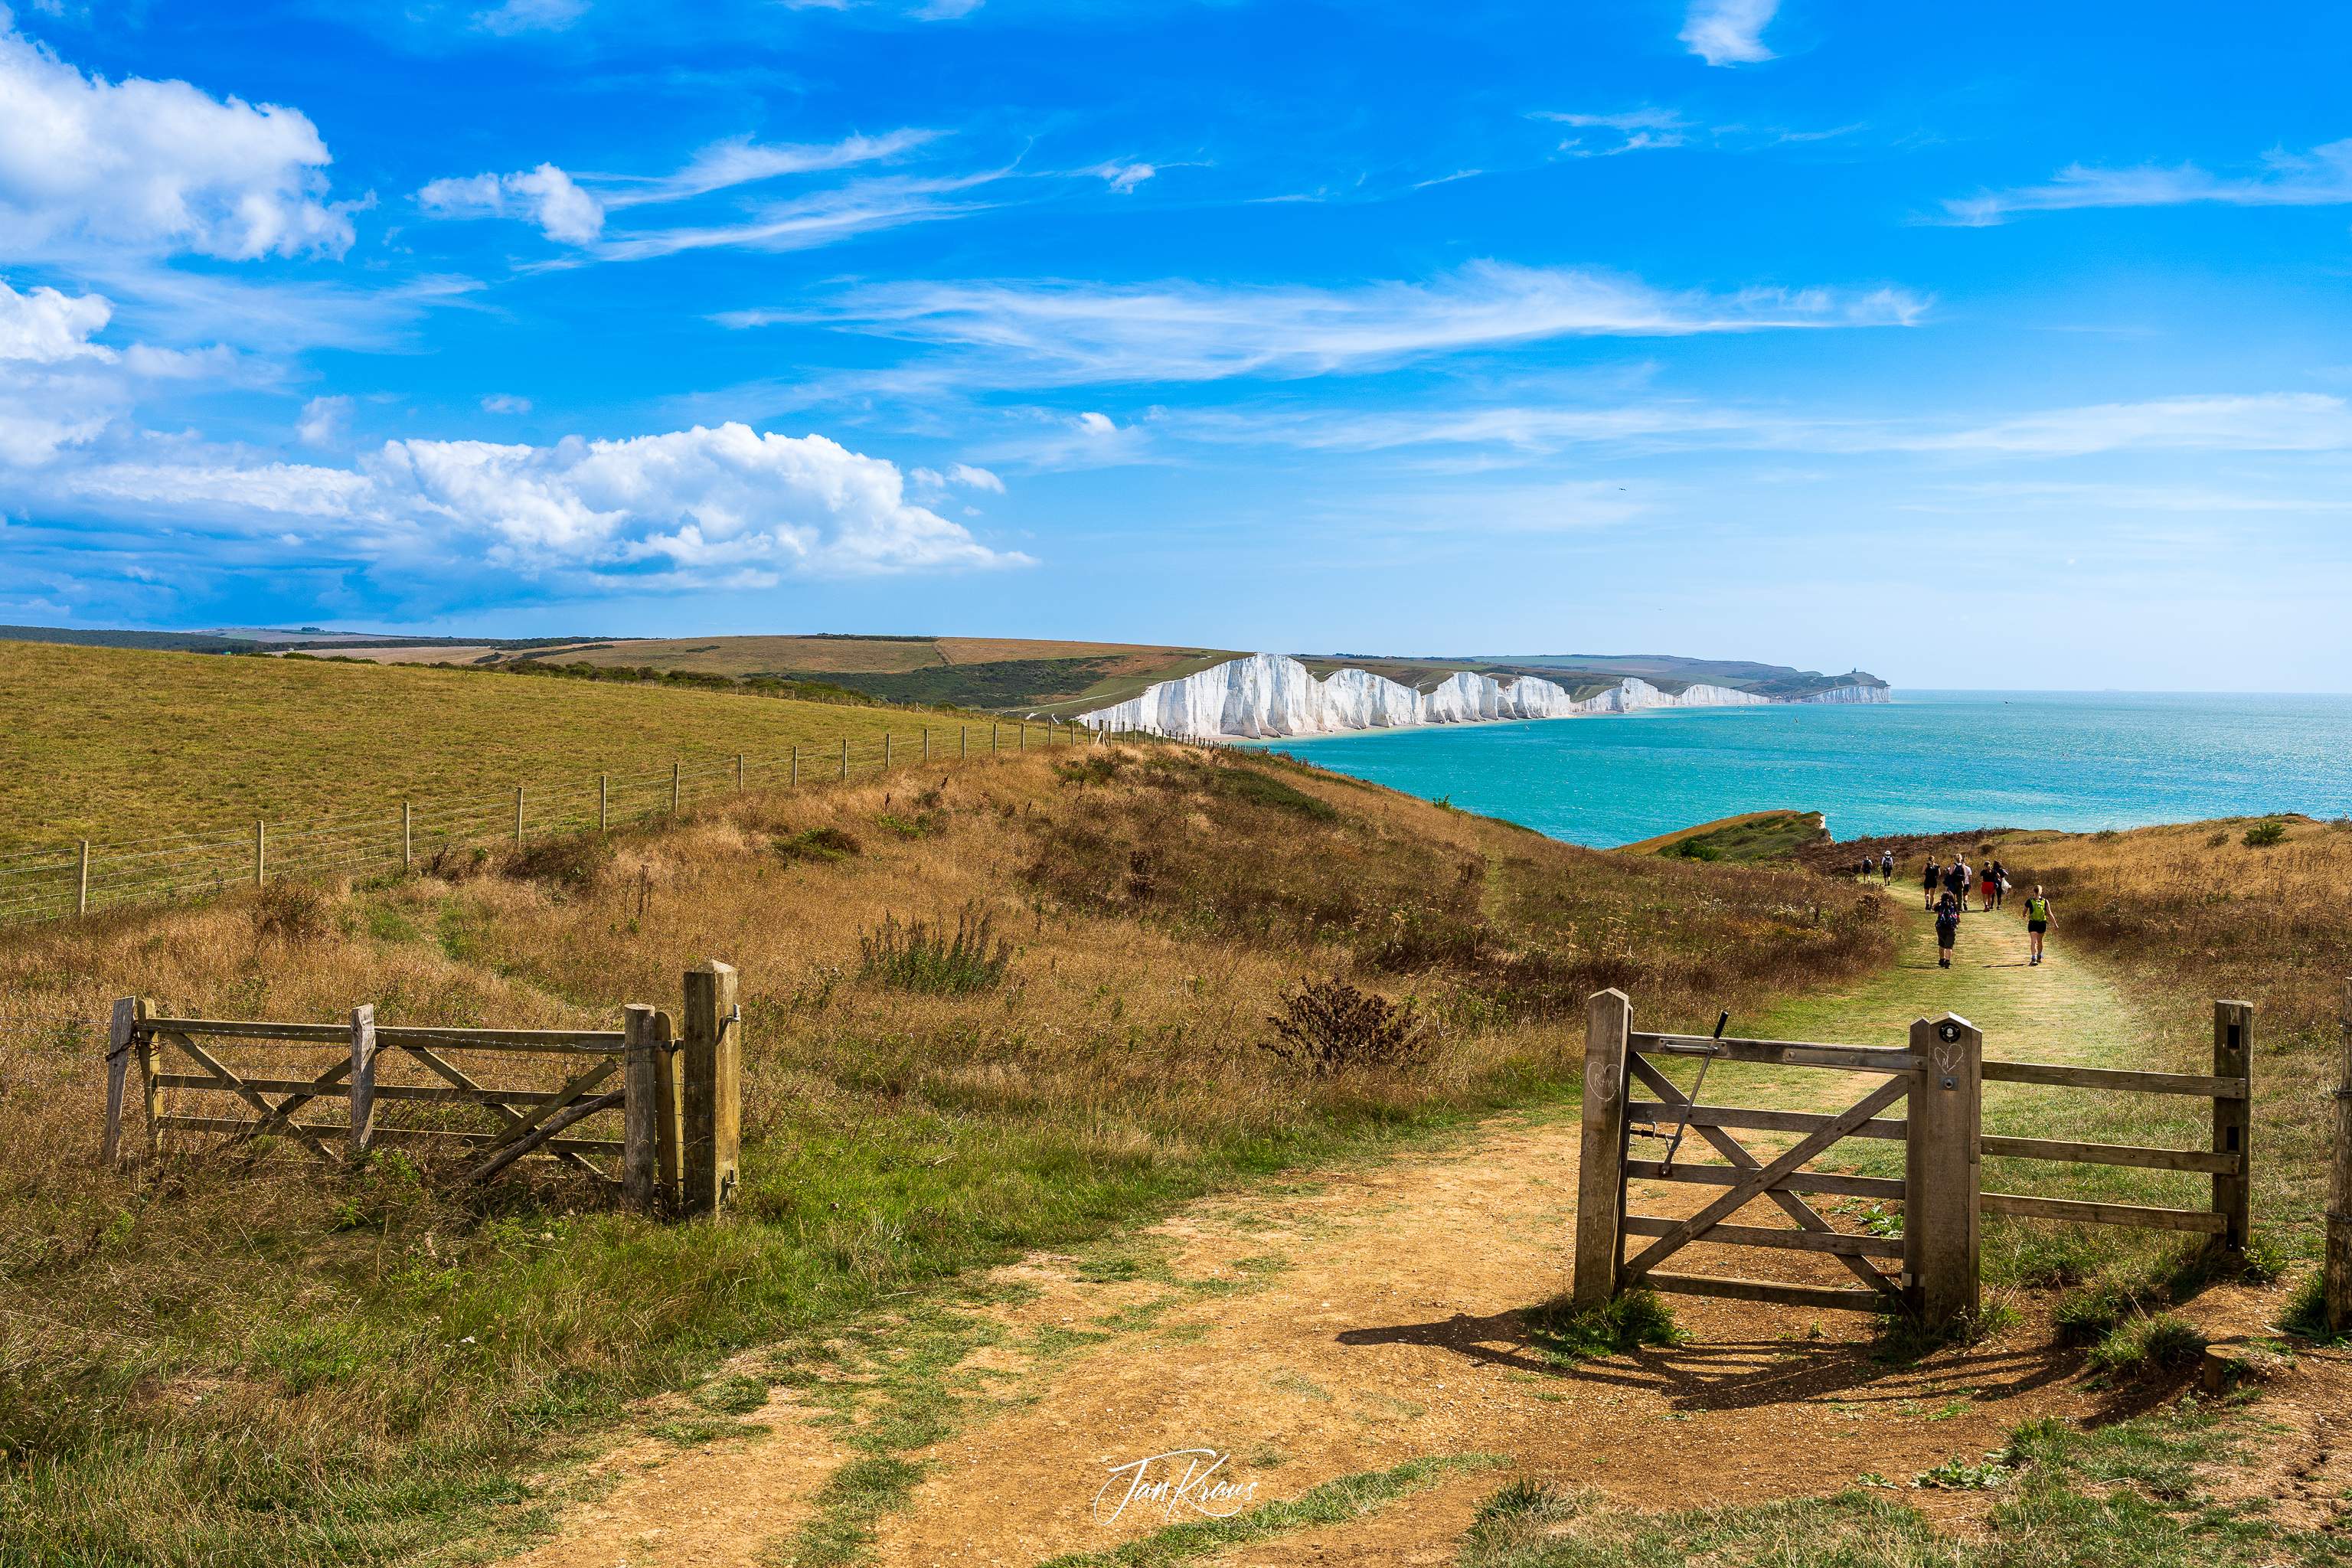 Walking along the coats mesmerized by the Seven Sisters, East Sussex, England, UK